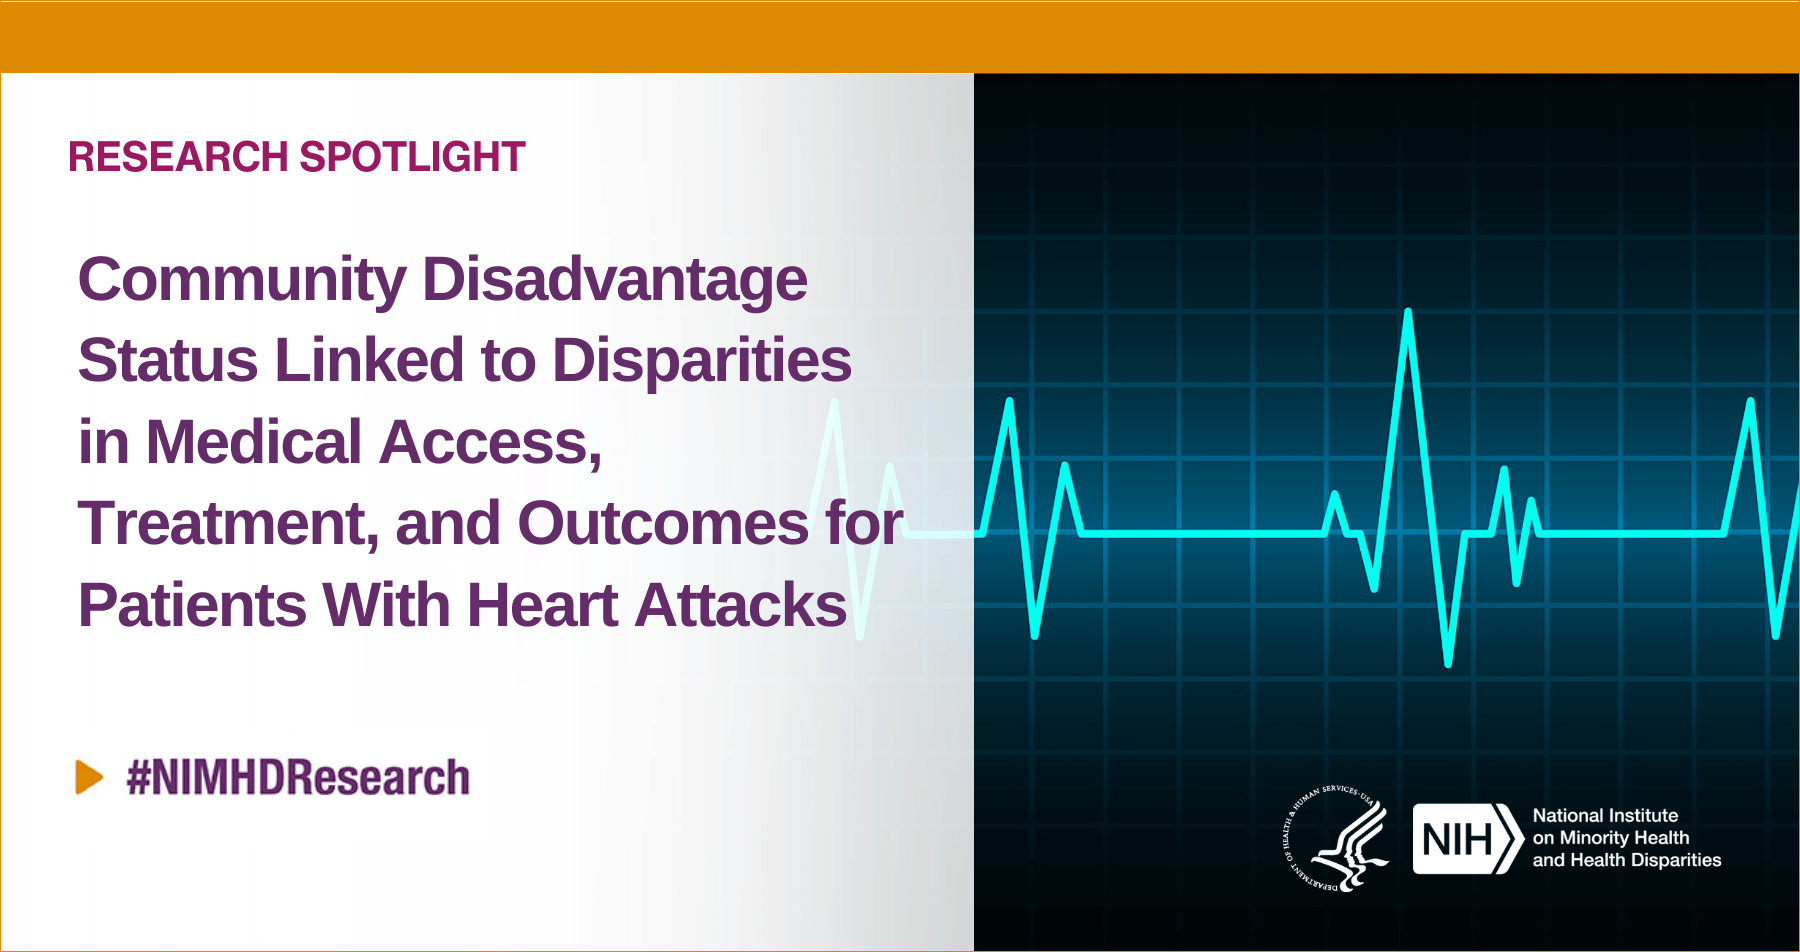 NIMHD Research Spotlight focuses on community disadvantage status and outcomes for patients with heart attacks. Graphic of heart waves